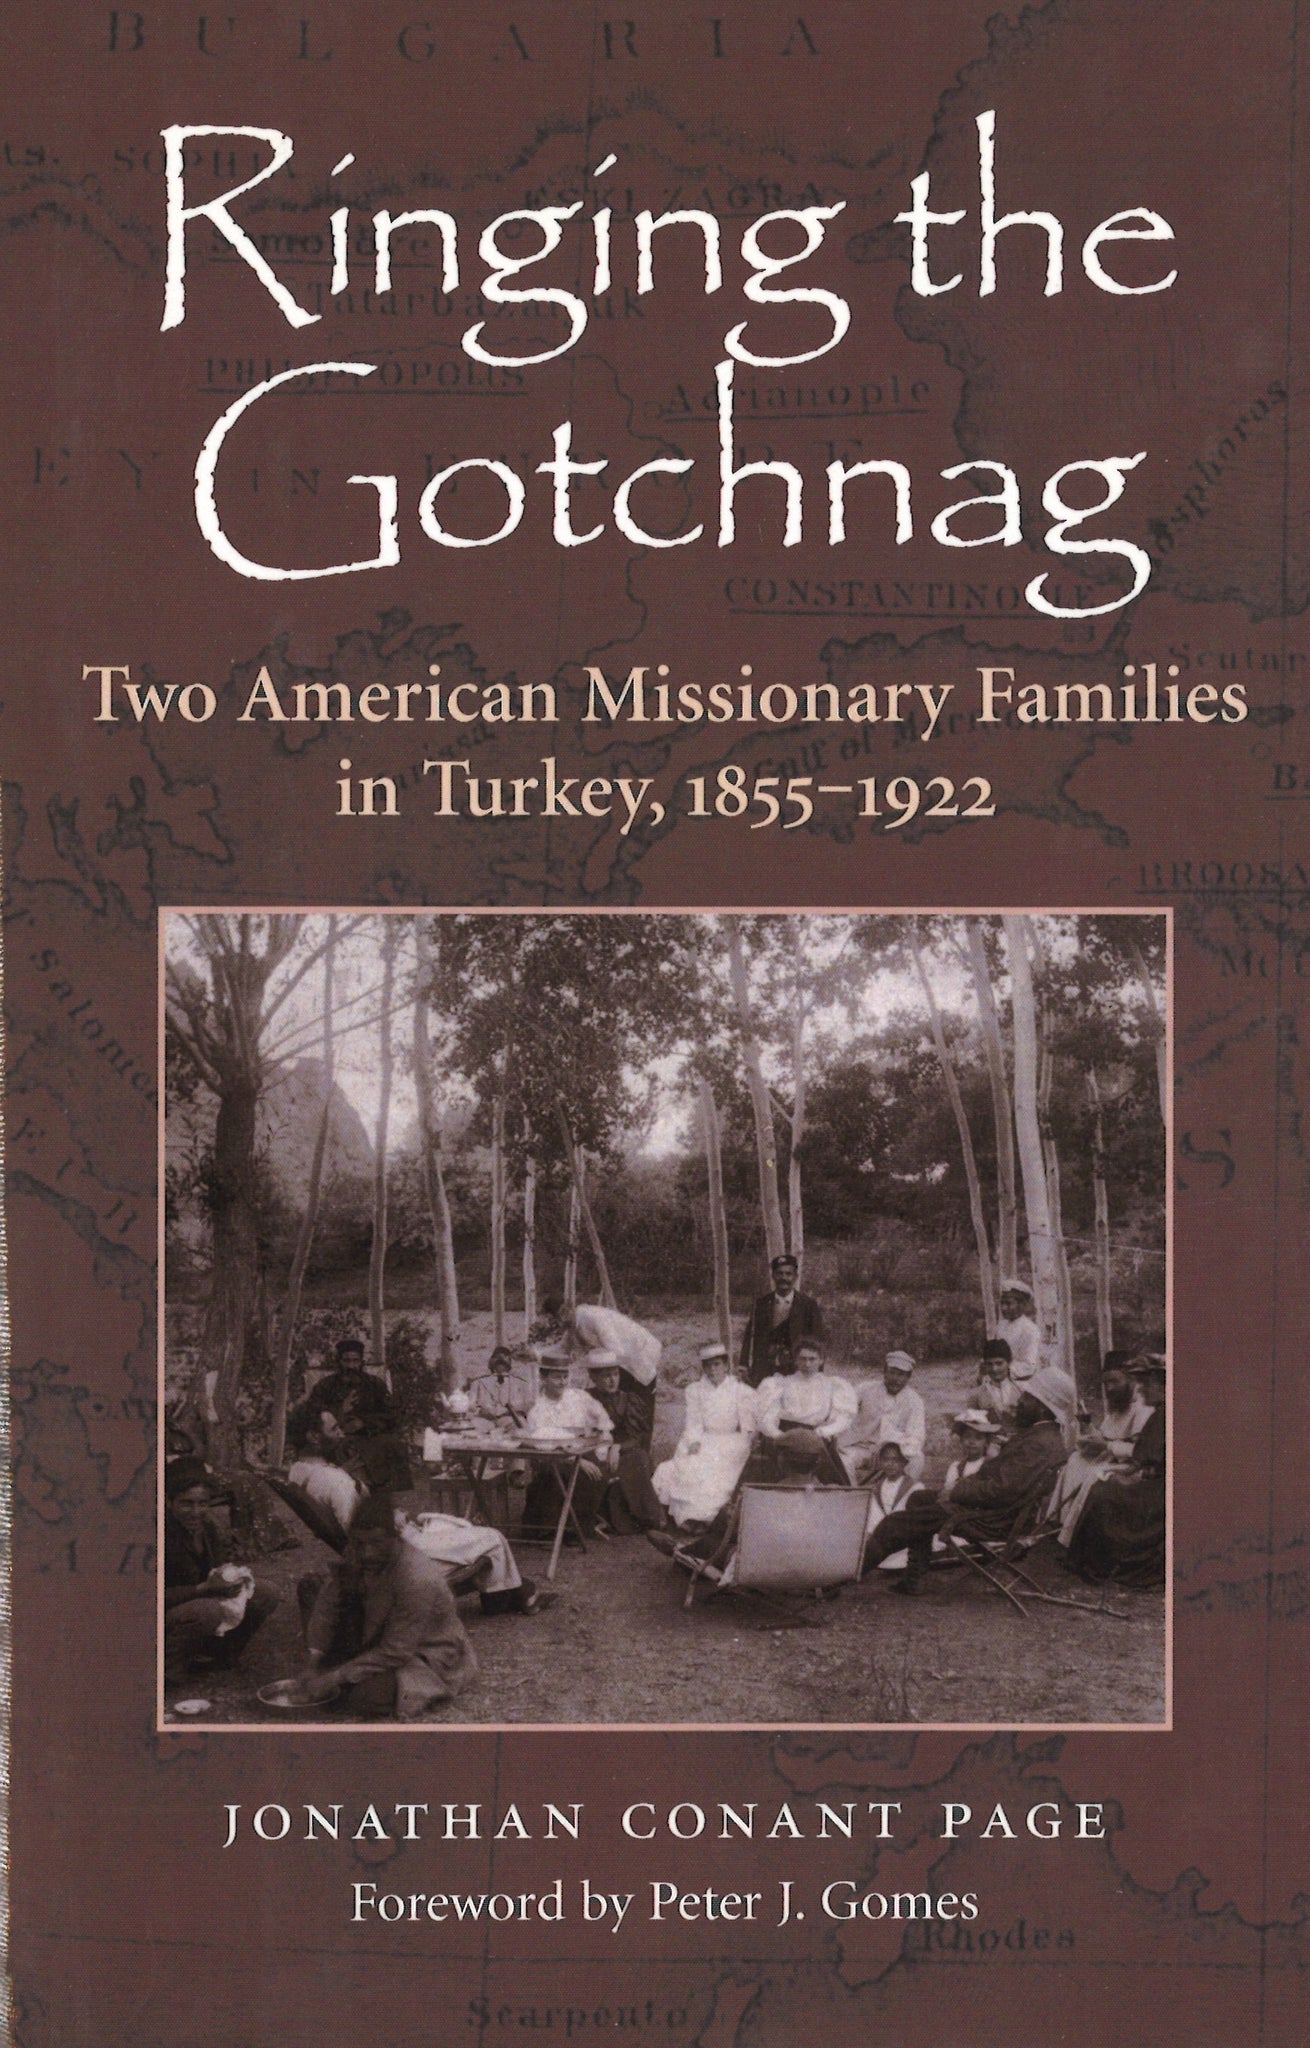 RINGING THE GOTCHNAG: Two American Missionary Families in Turkey, 1855-1922